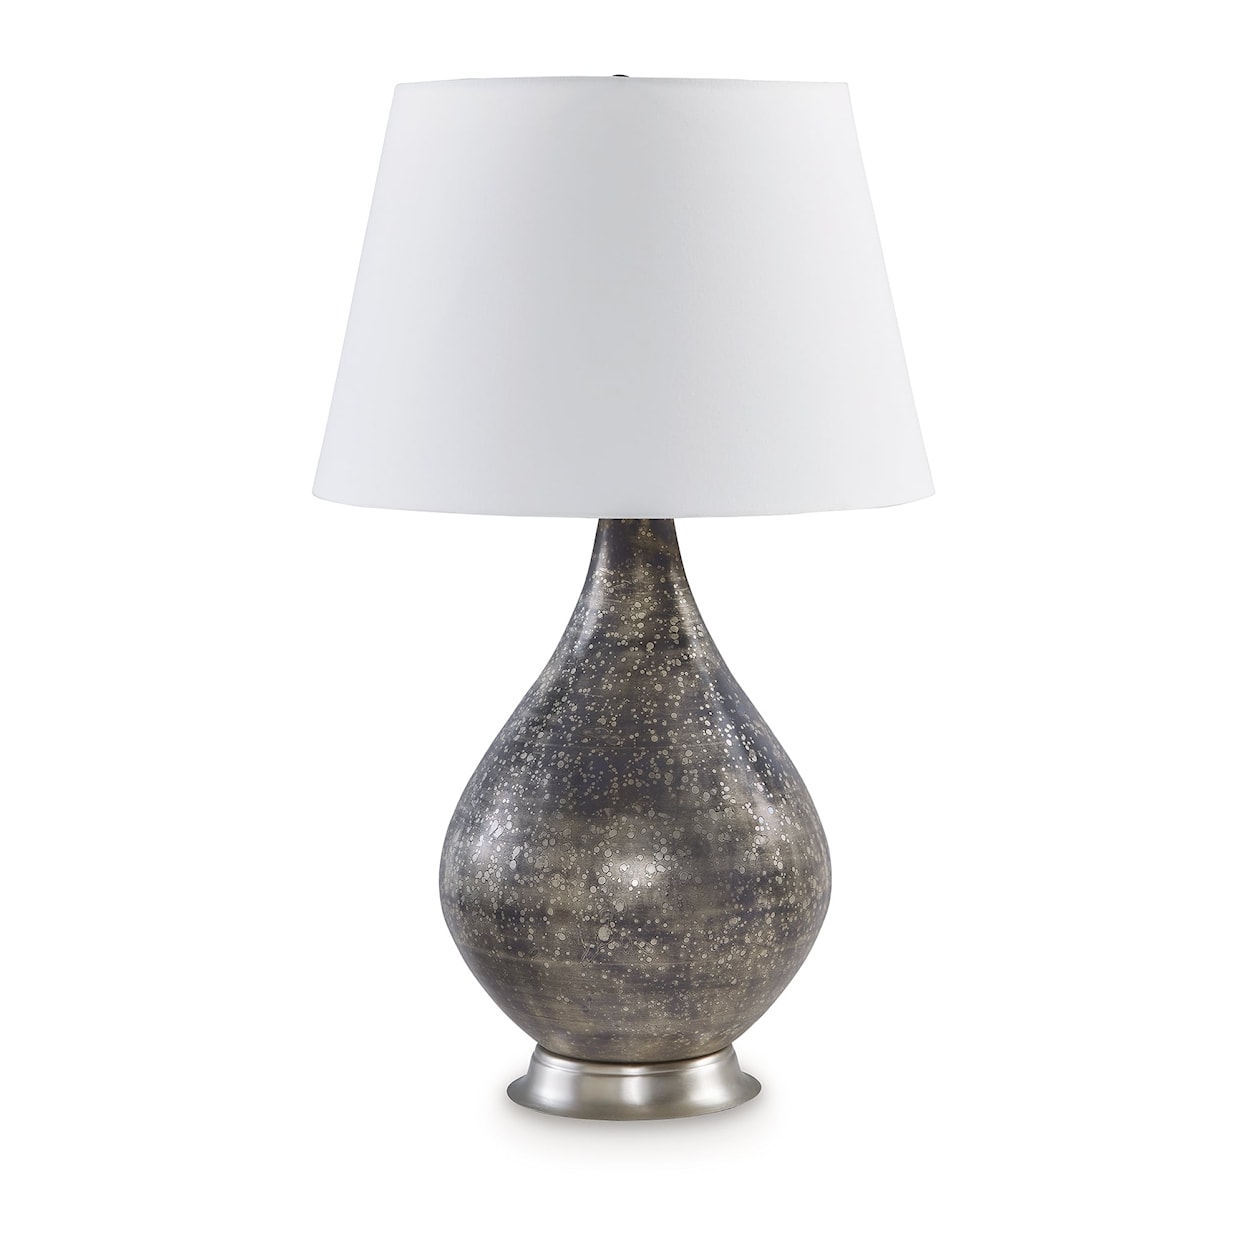 Signature Design by Ashley Bluacy Glass Table Lamp